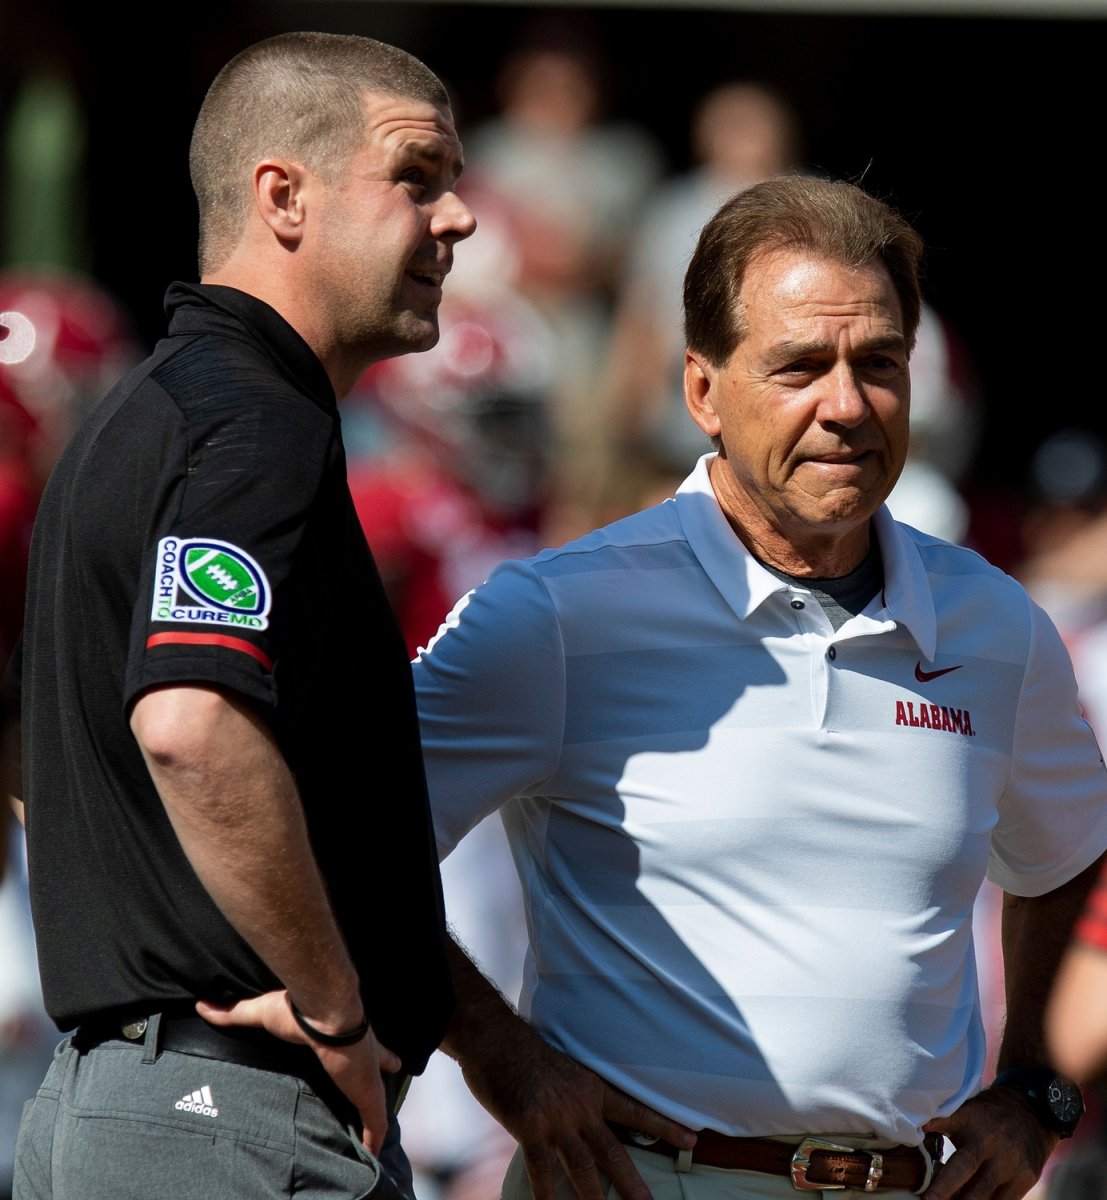 Billy Napier and Nick Saban prior to a game in 2018